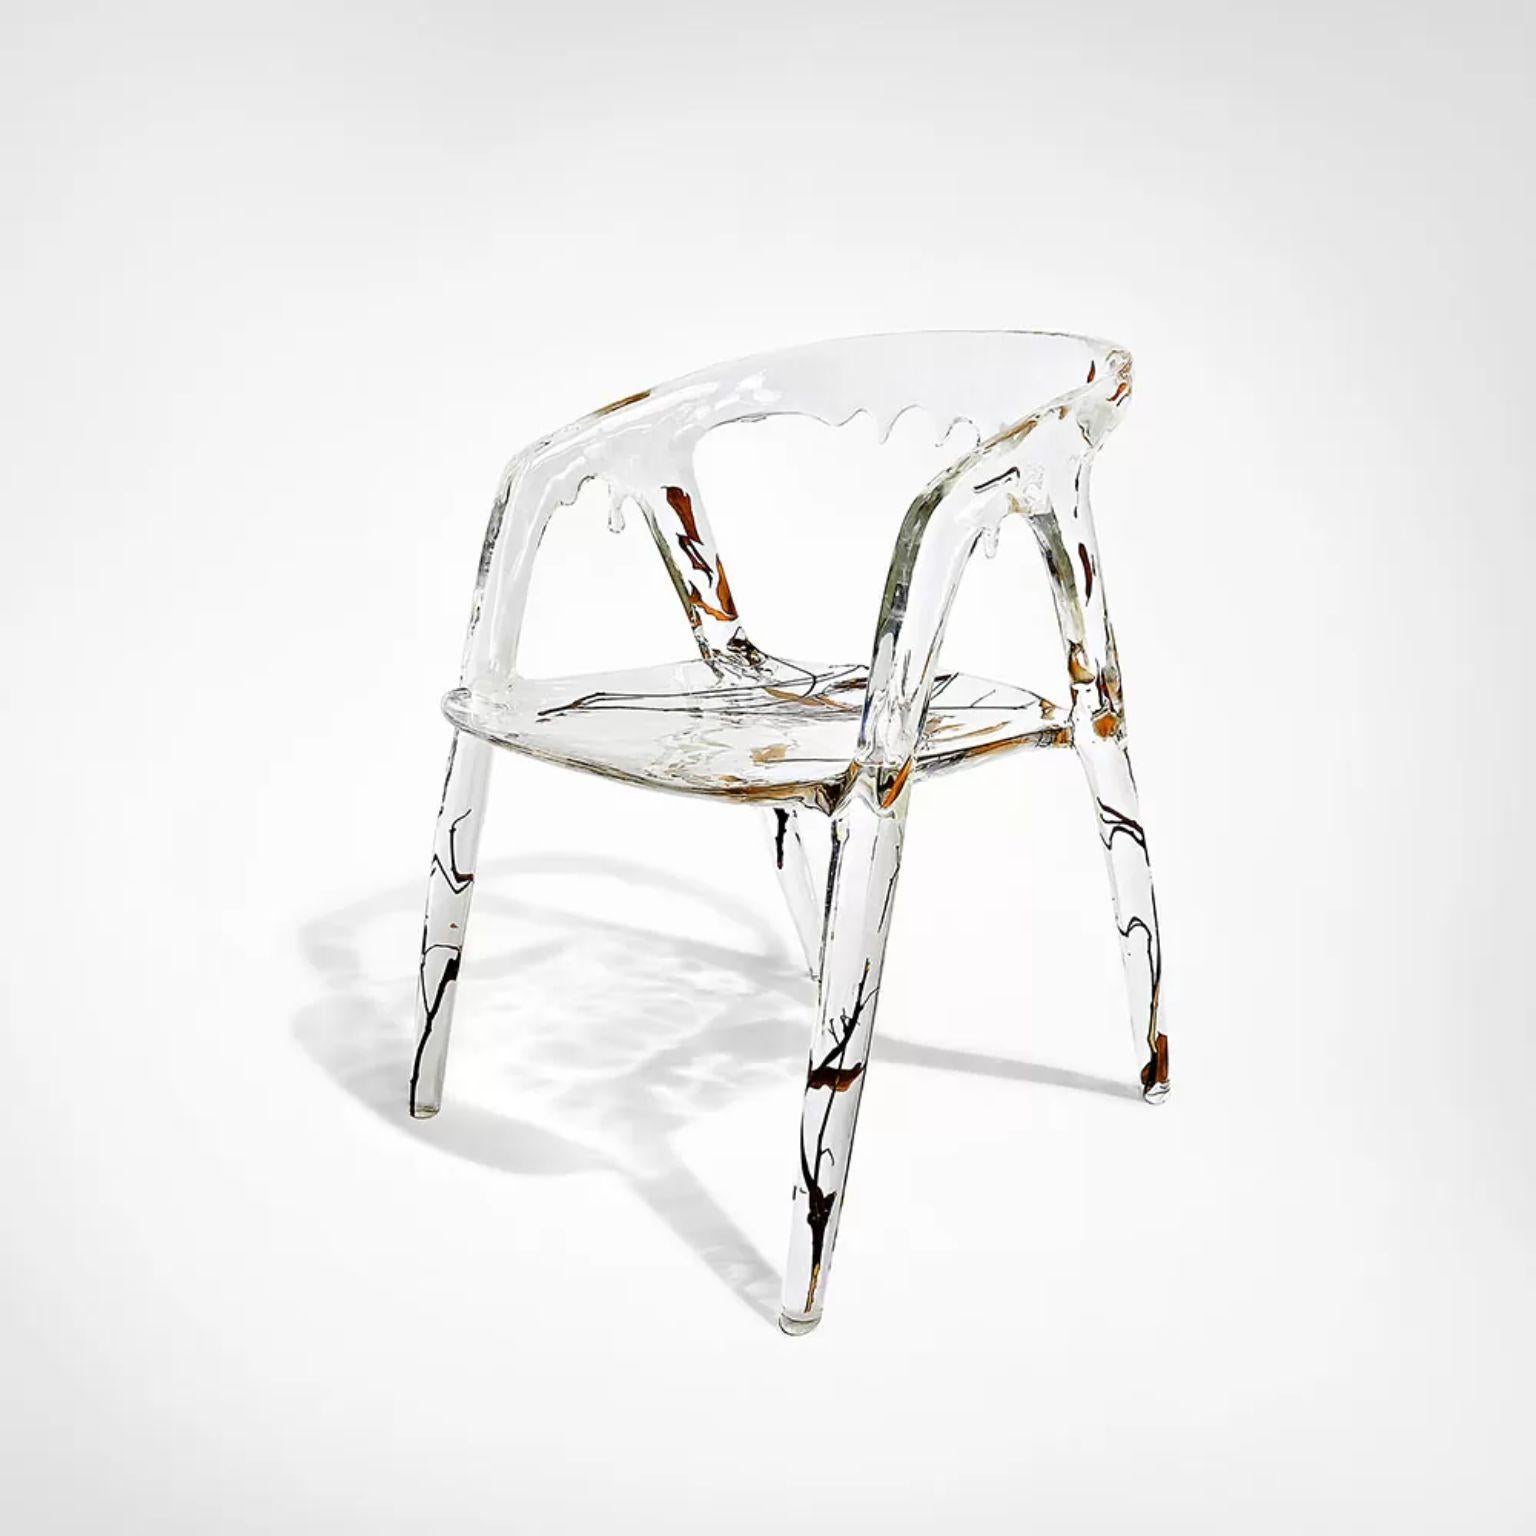 Crystal Waterfall Armchair by Dainte
Dimensions: D 53.5 x W 53.5 x H 71 cm.
Materials: Crystal. 

This decorative luxury armchair is dripping with style and sophistication. Made of sleek and lustrous crystal mixed with acrylic that has been enhanced